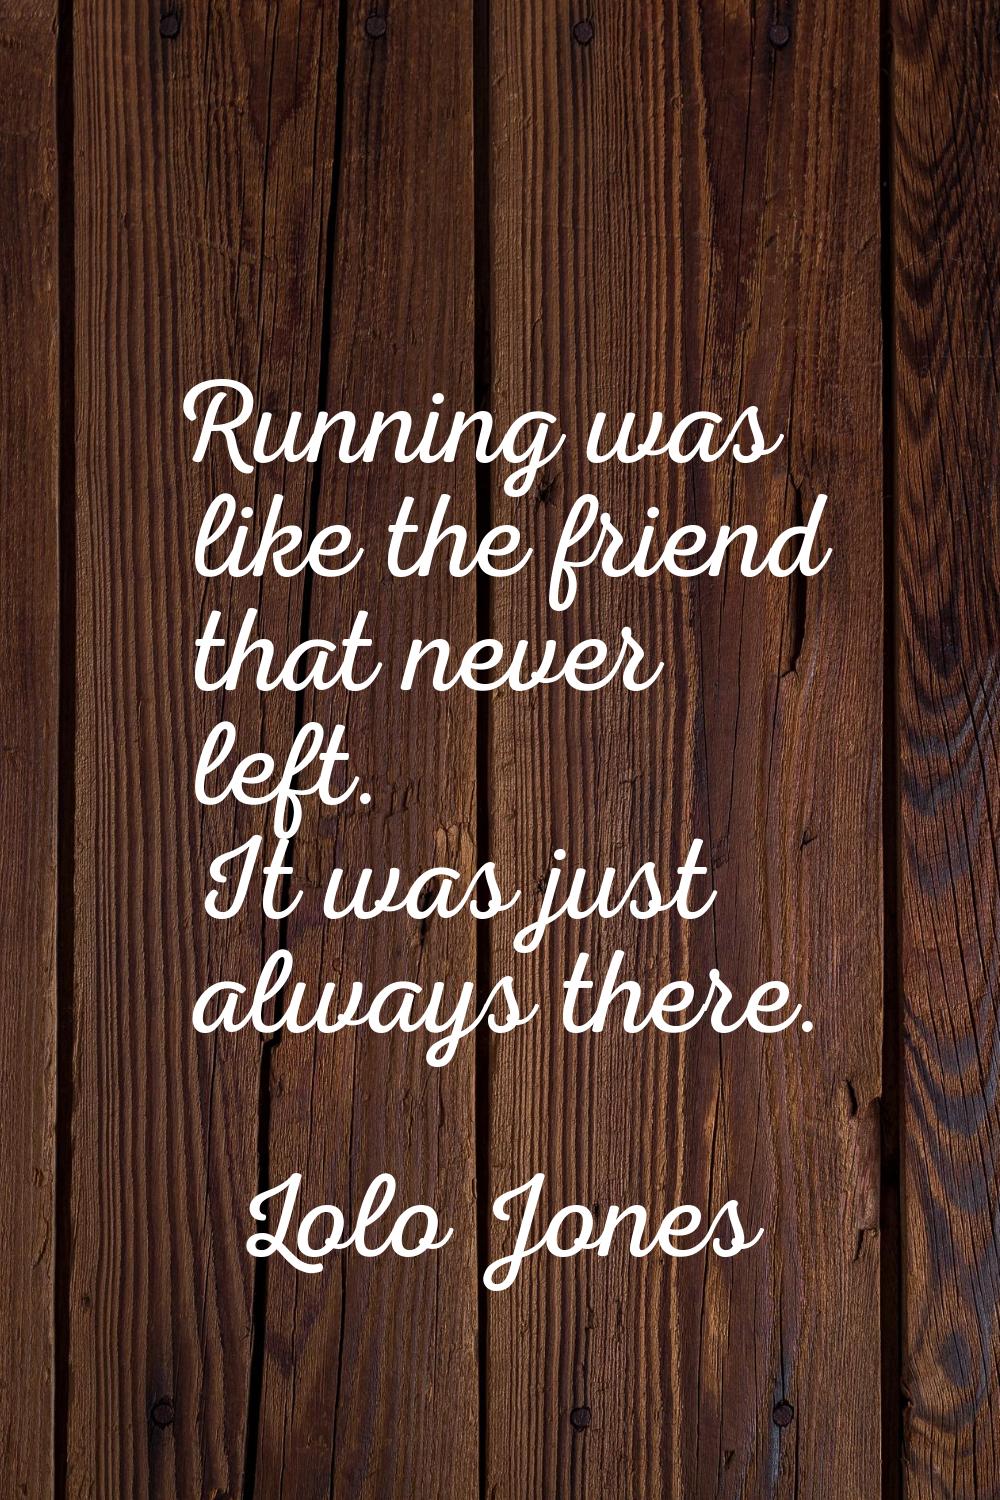 Running was like the friend that never left. It was just always there.